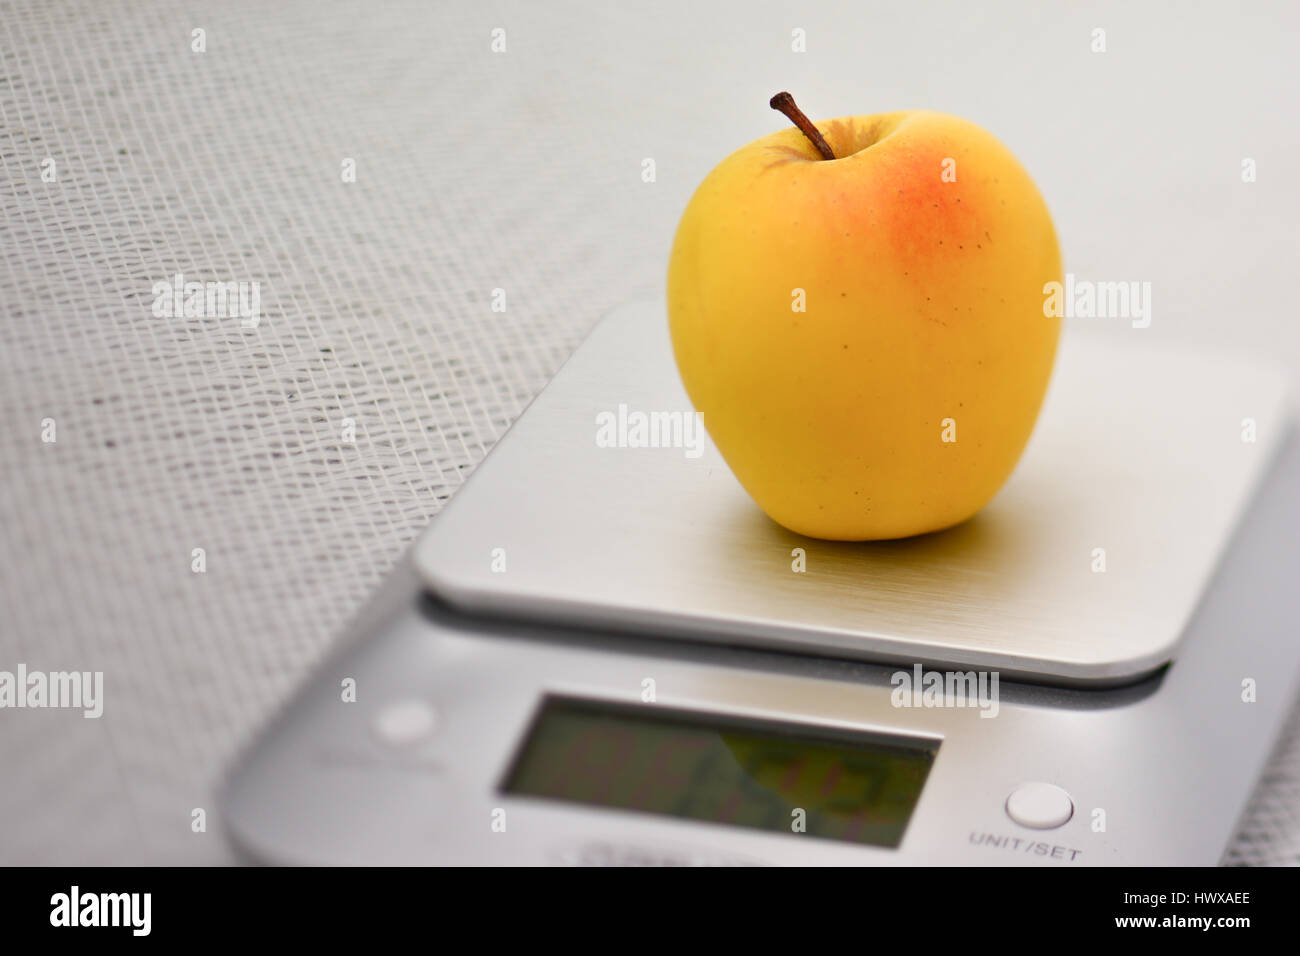 https://c8.alamy.com/comp/HWXAEE/a-single-golden-apple-on-a-stainless-steel-kitchen-scale-HWXAEE.jpg